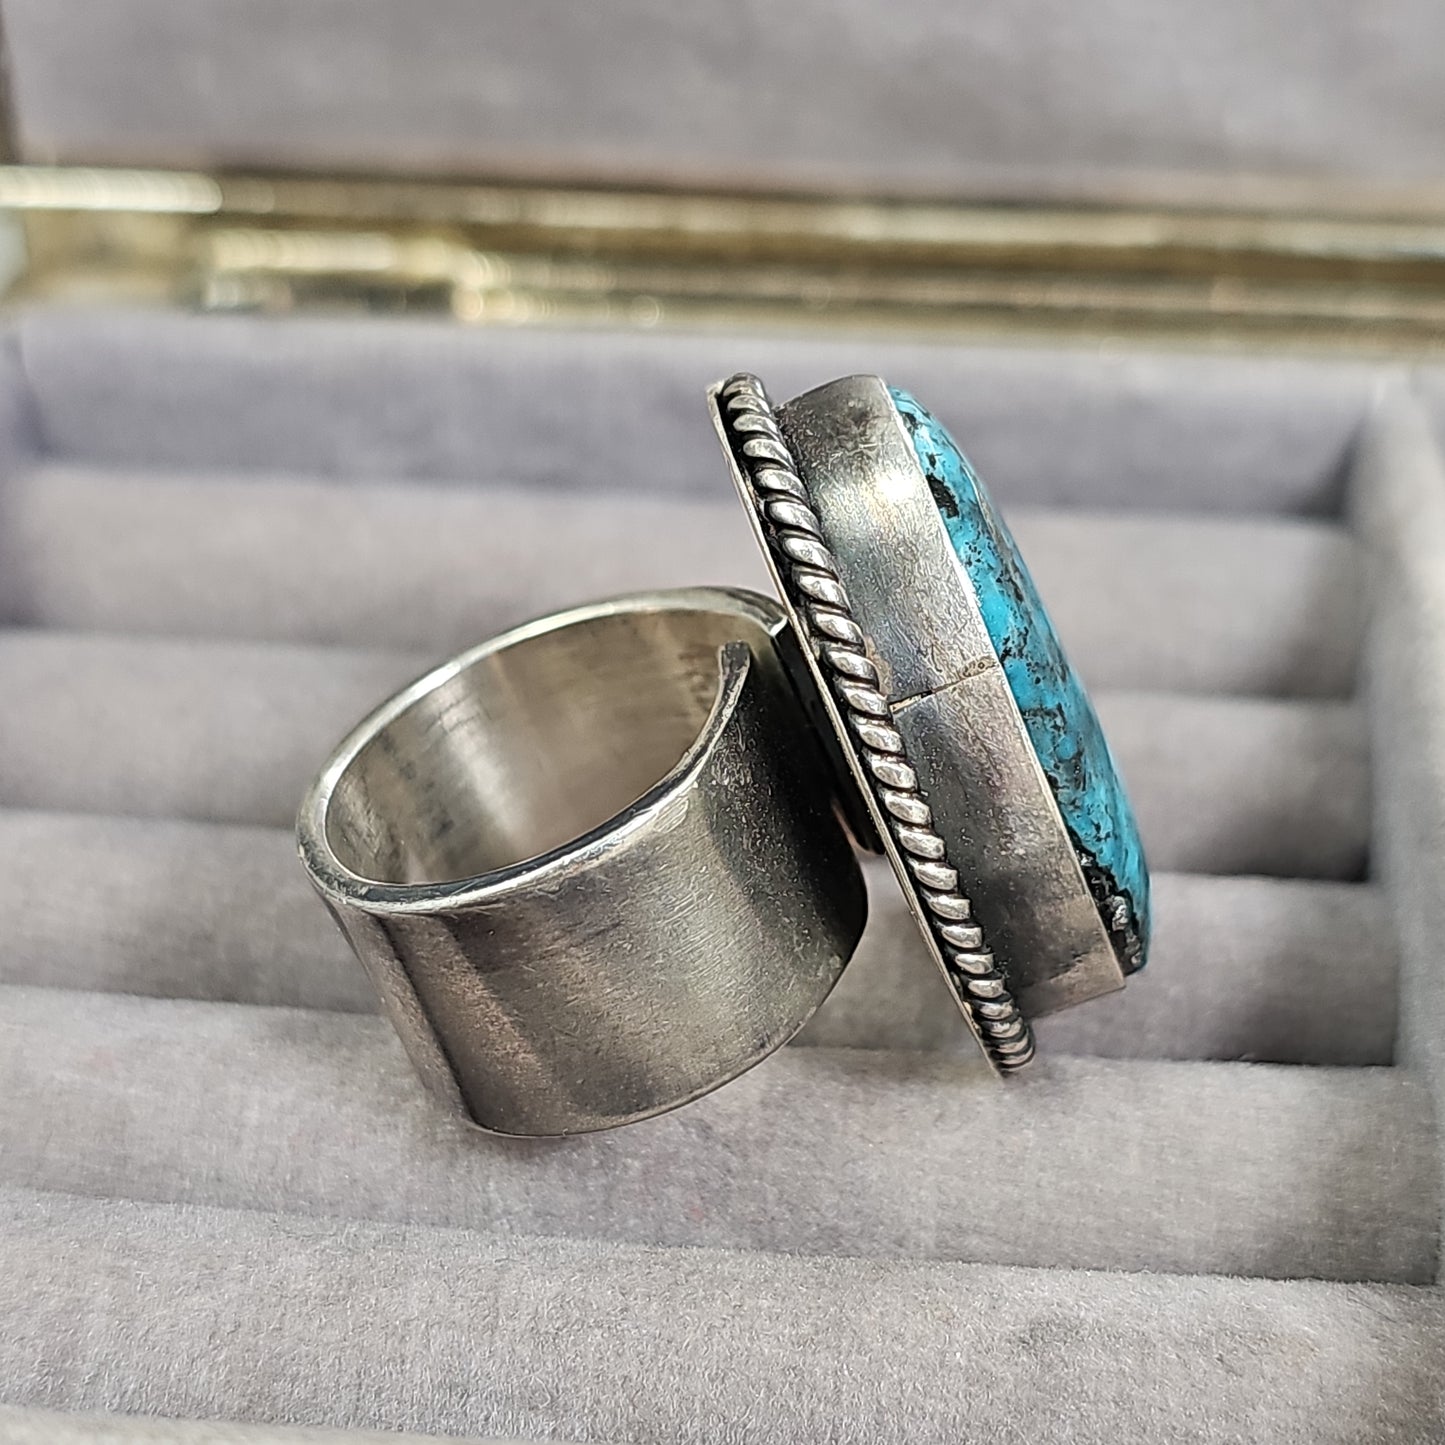 Turquoise & sterling ring